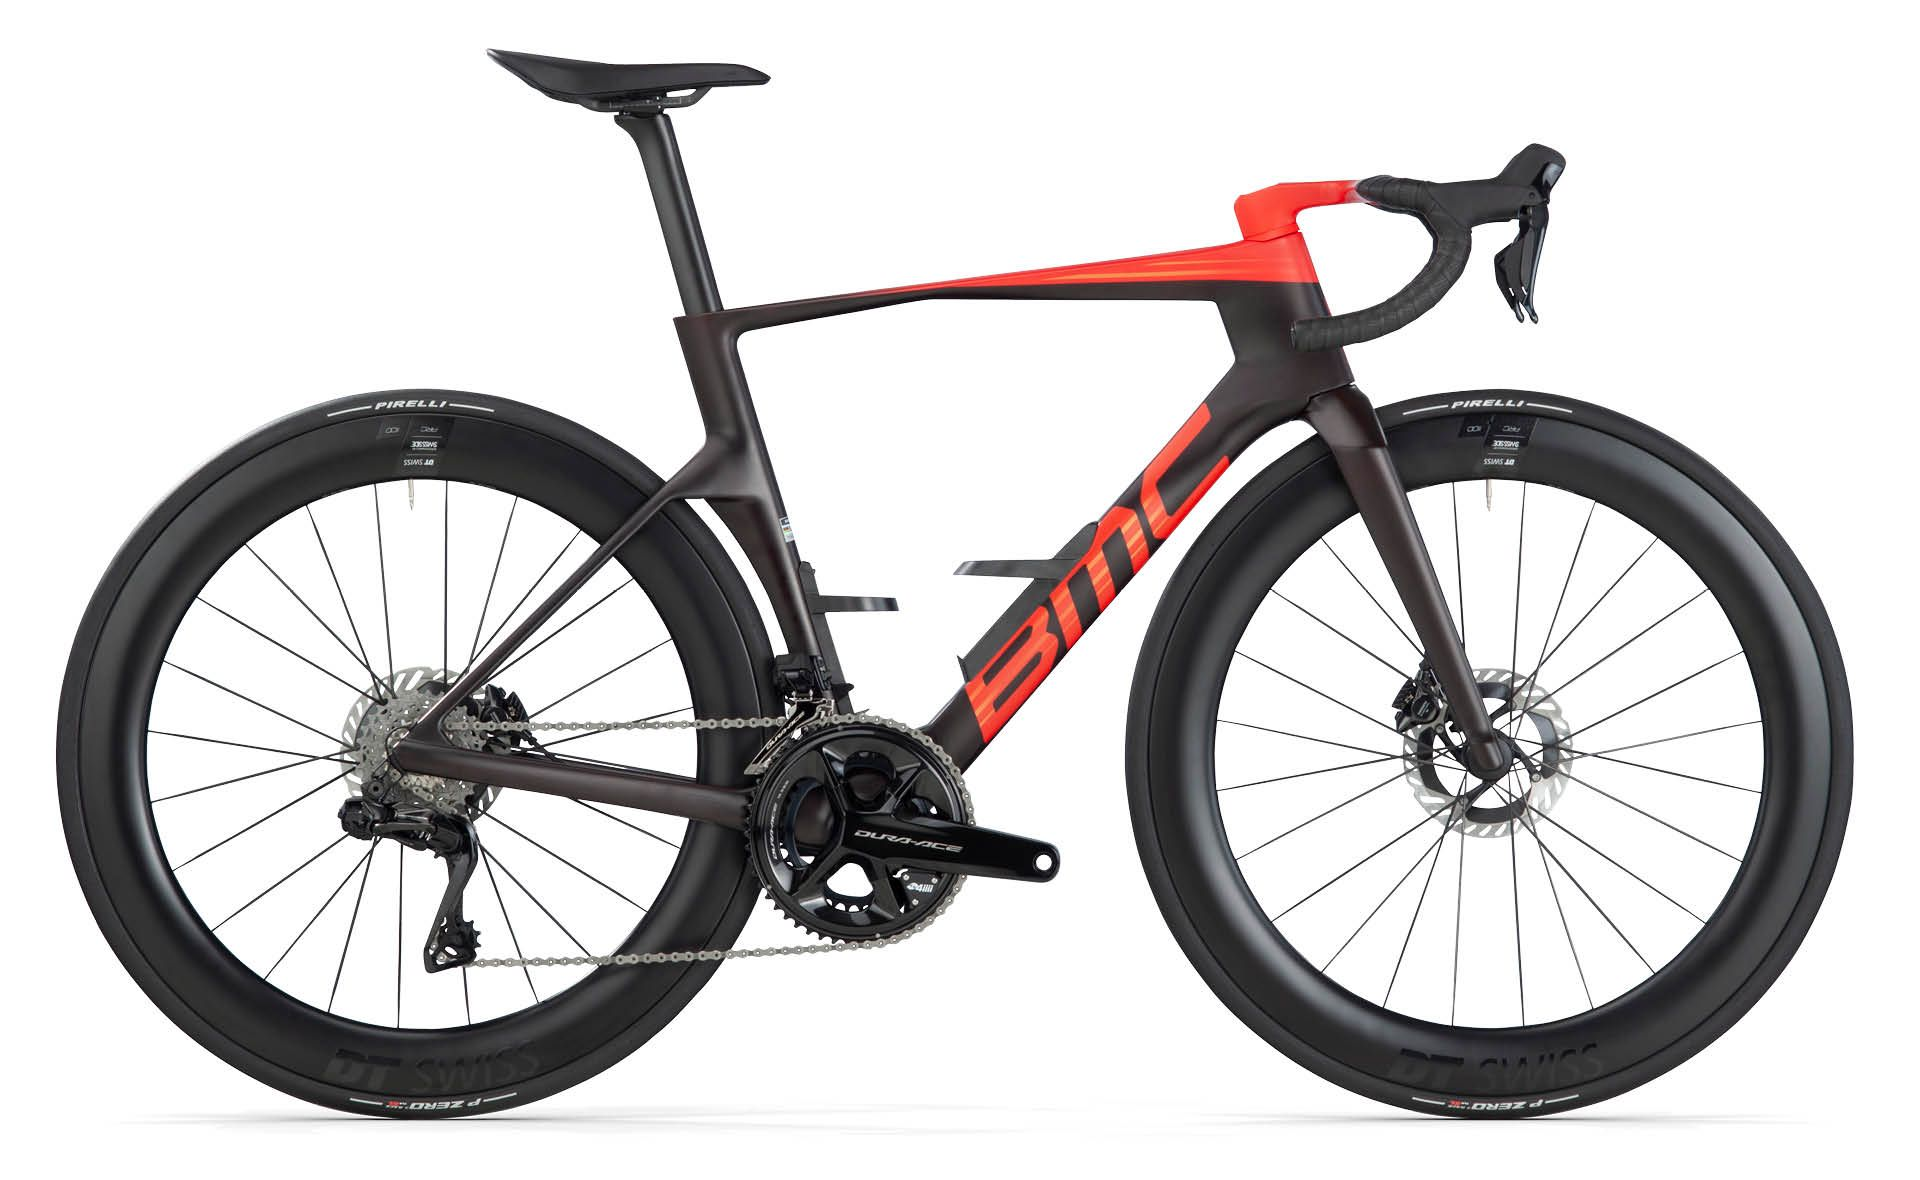 The photo shows BMC's new TeamMachine R 01 Two.